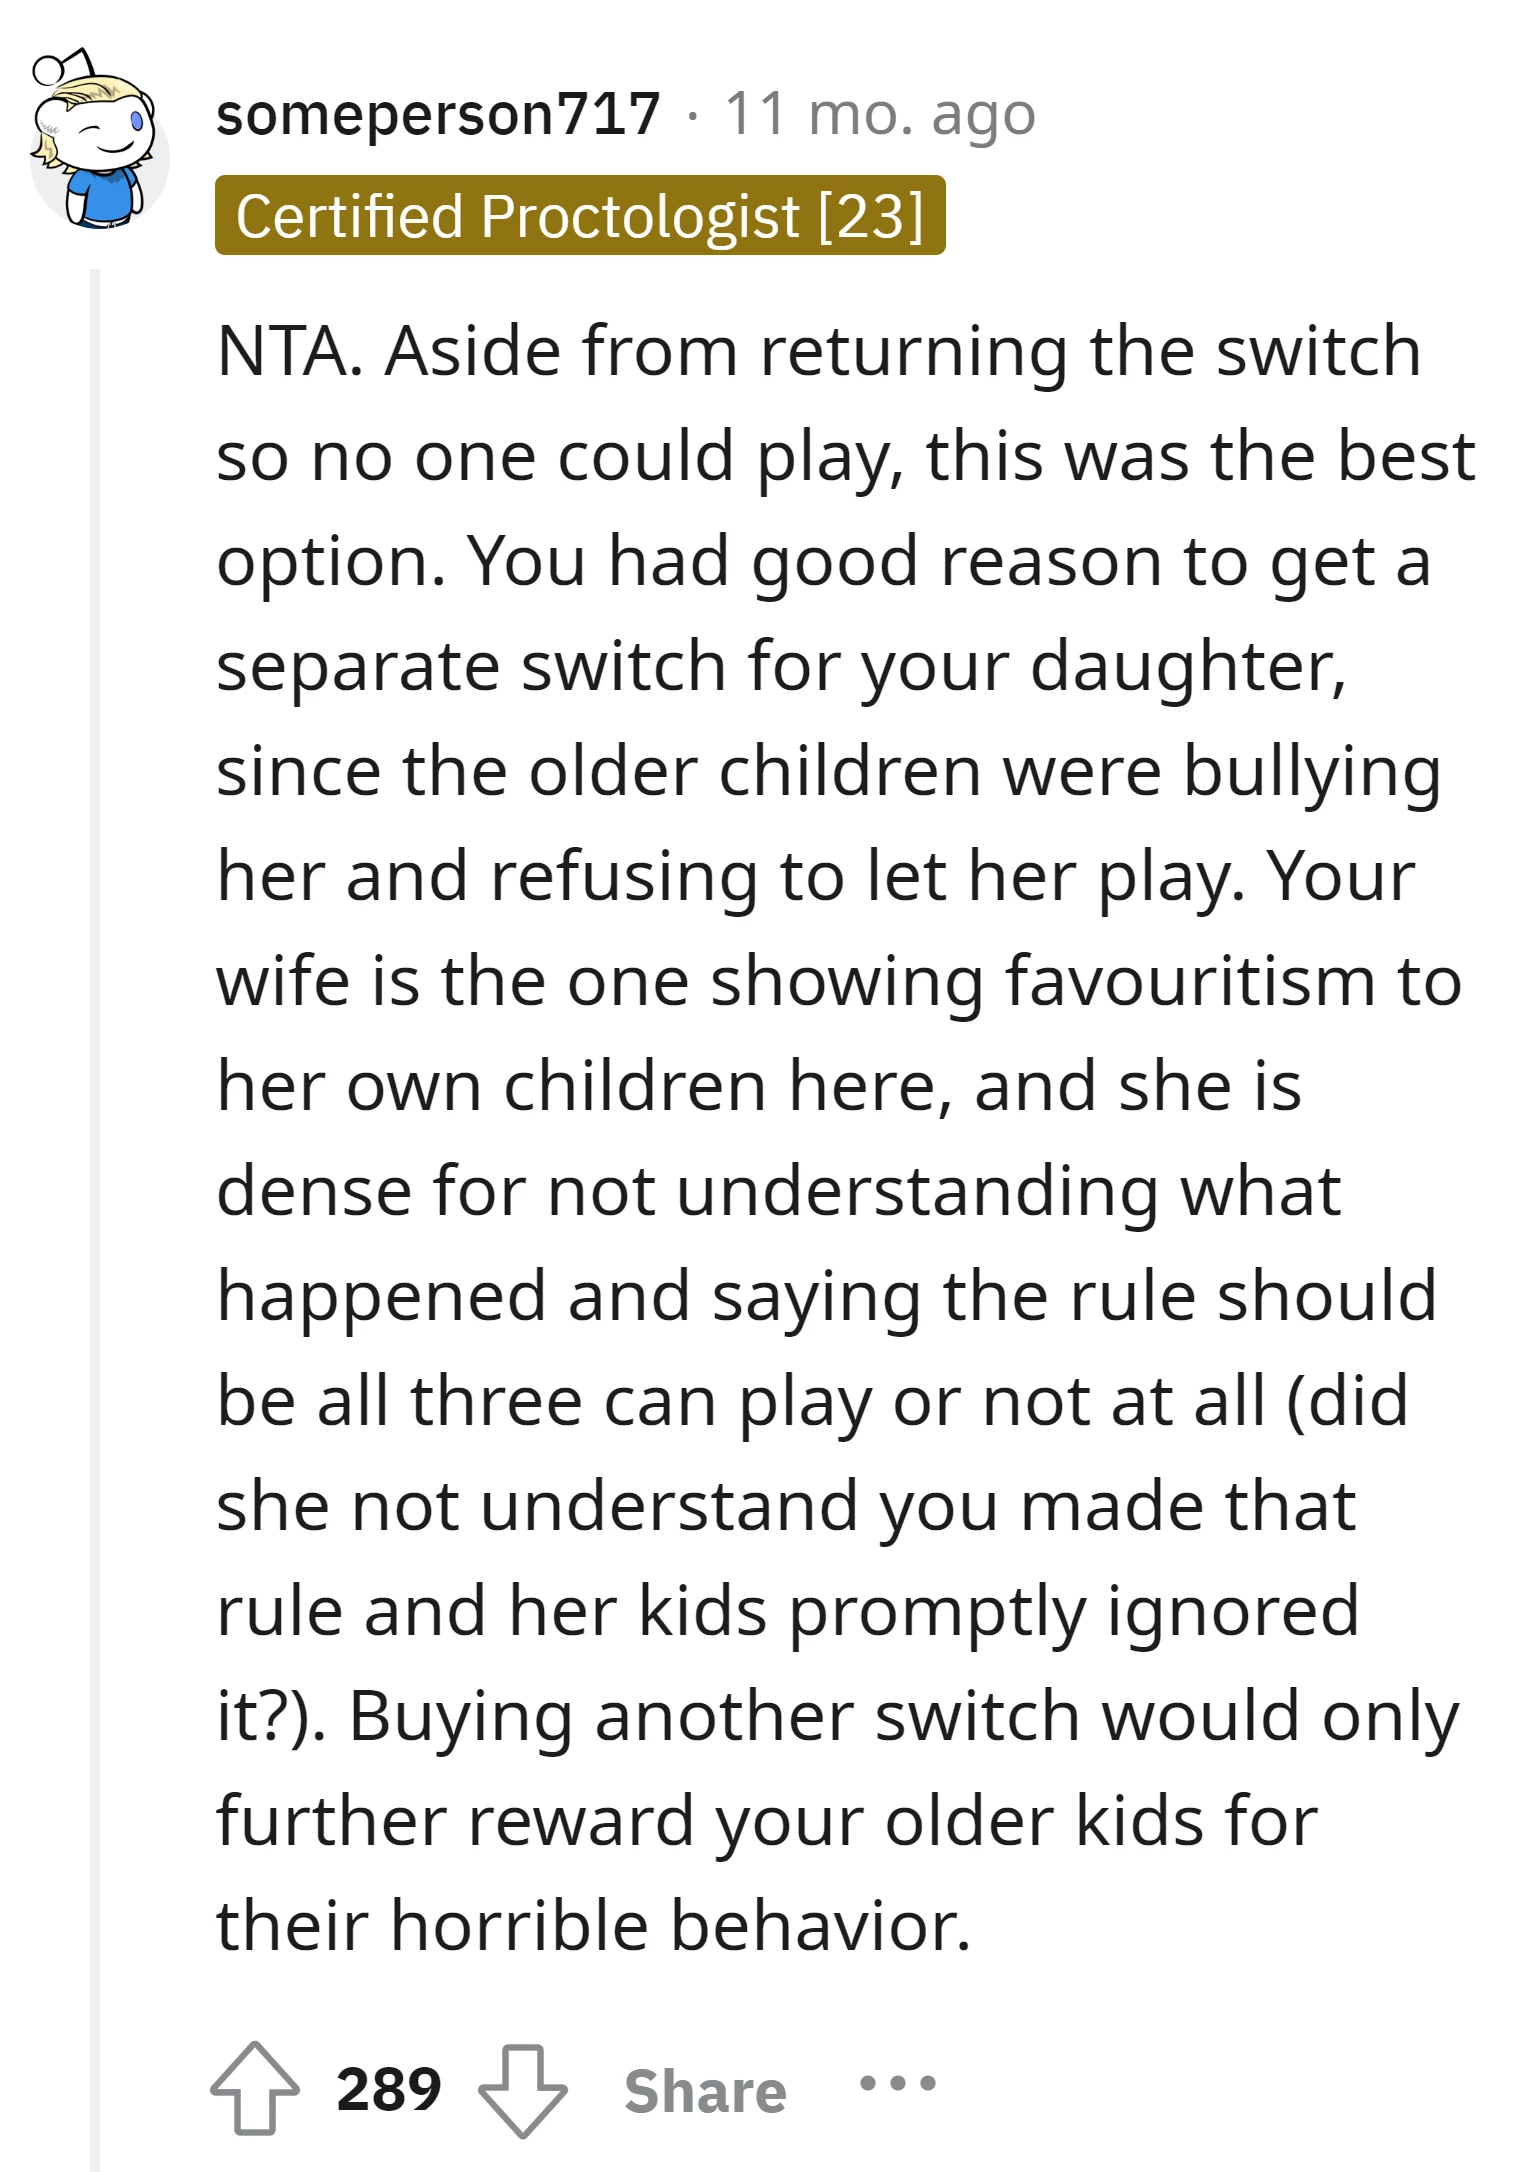 Get a separate switch for the daughter due to bullying from the older kids is a great move